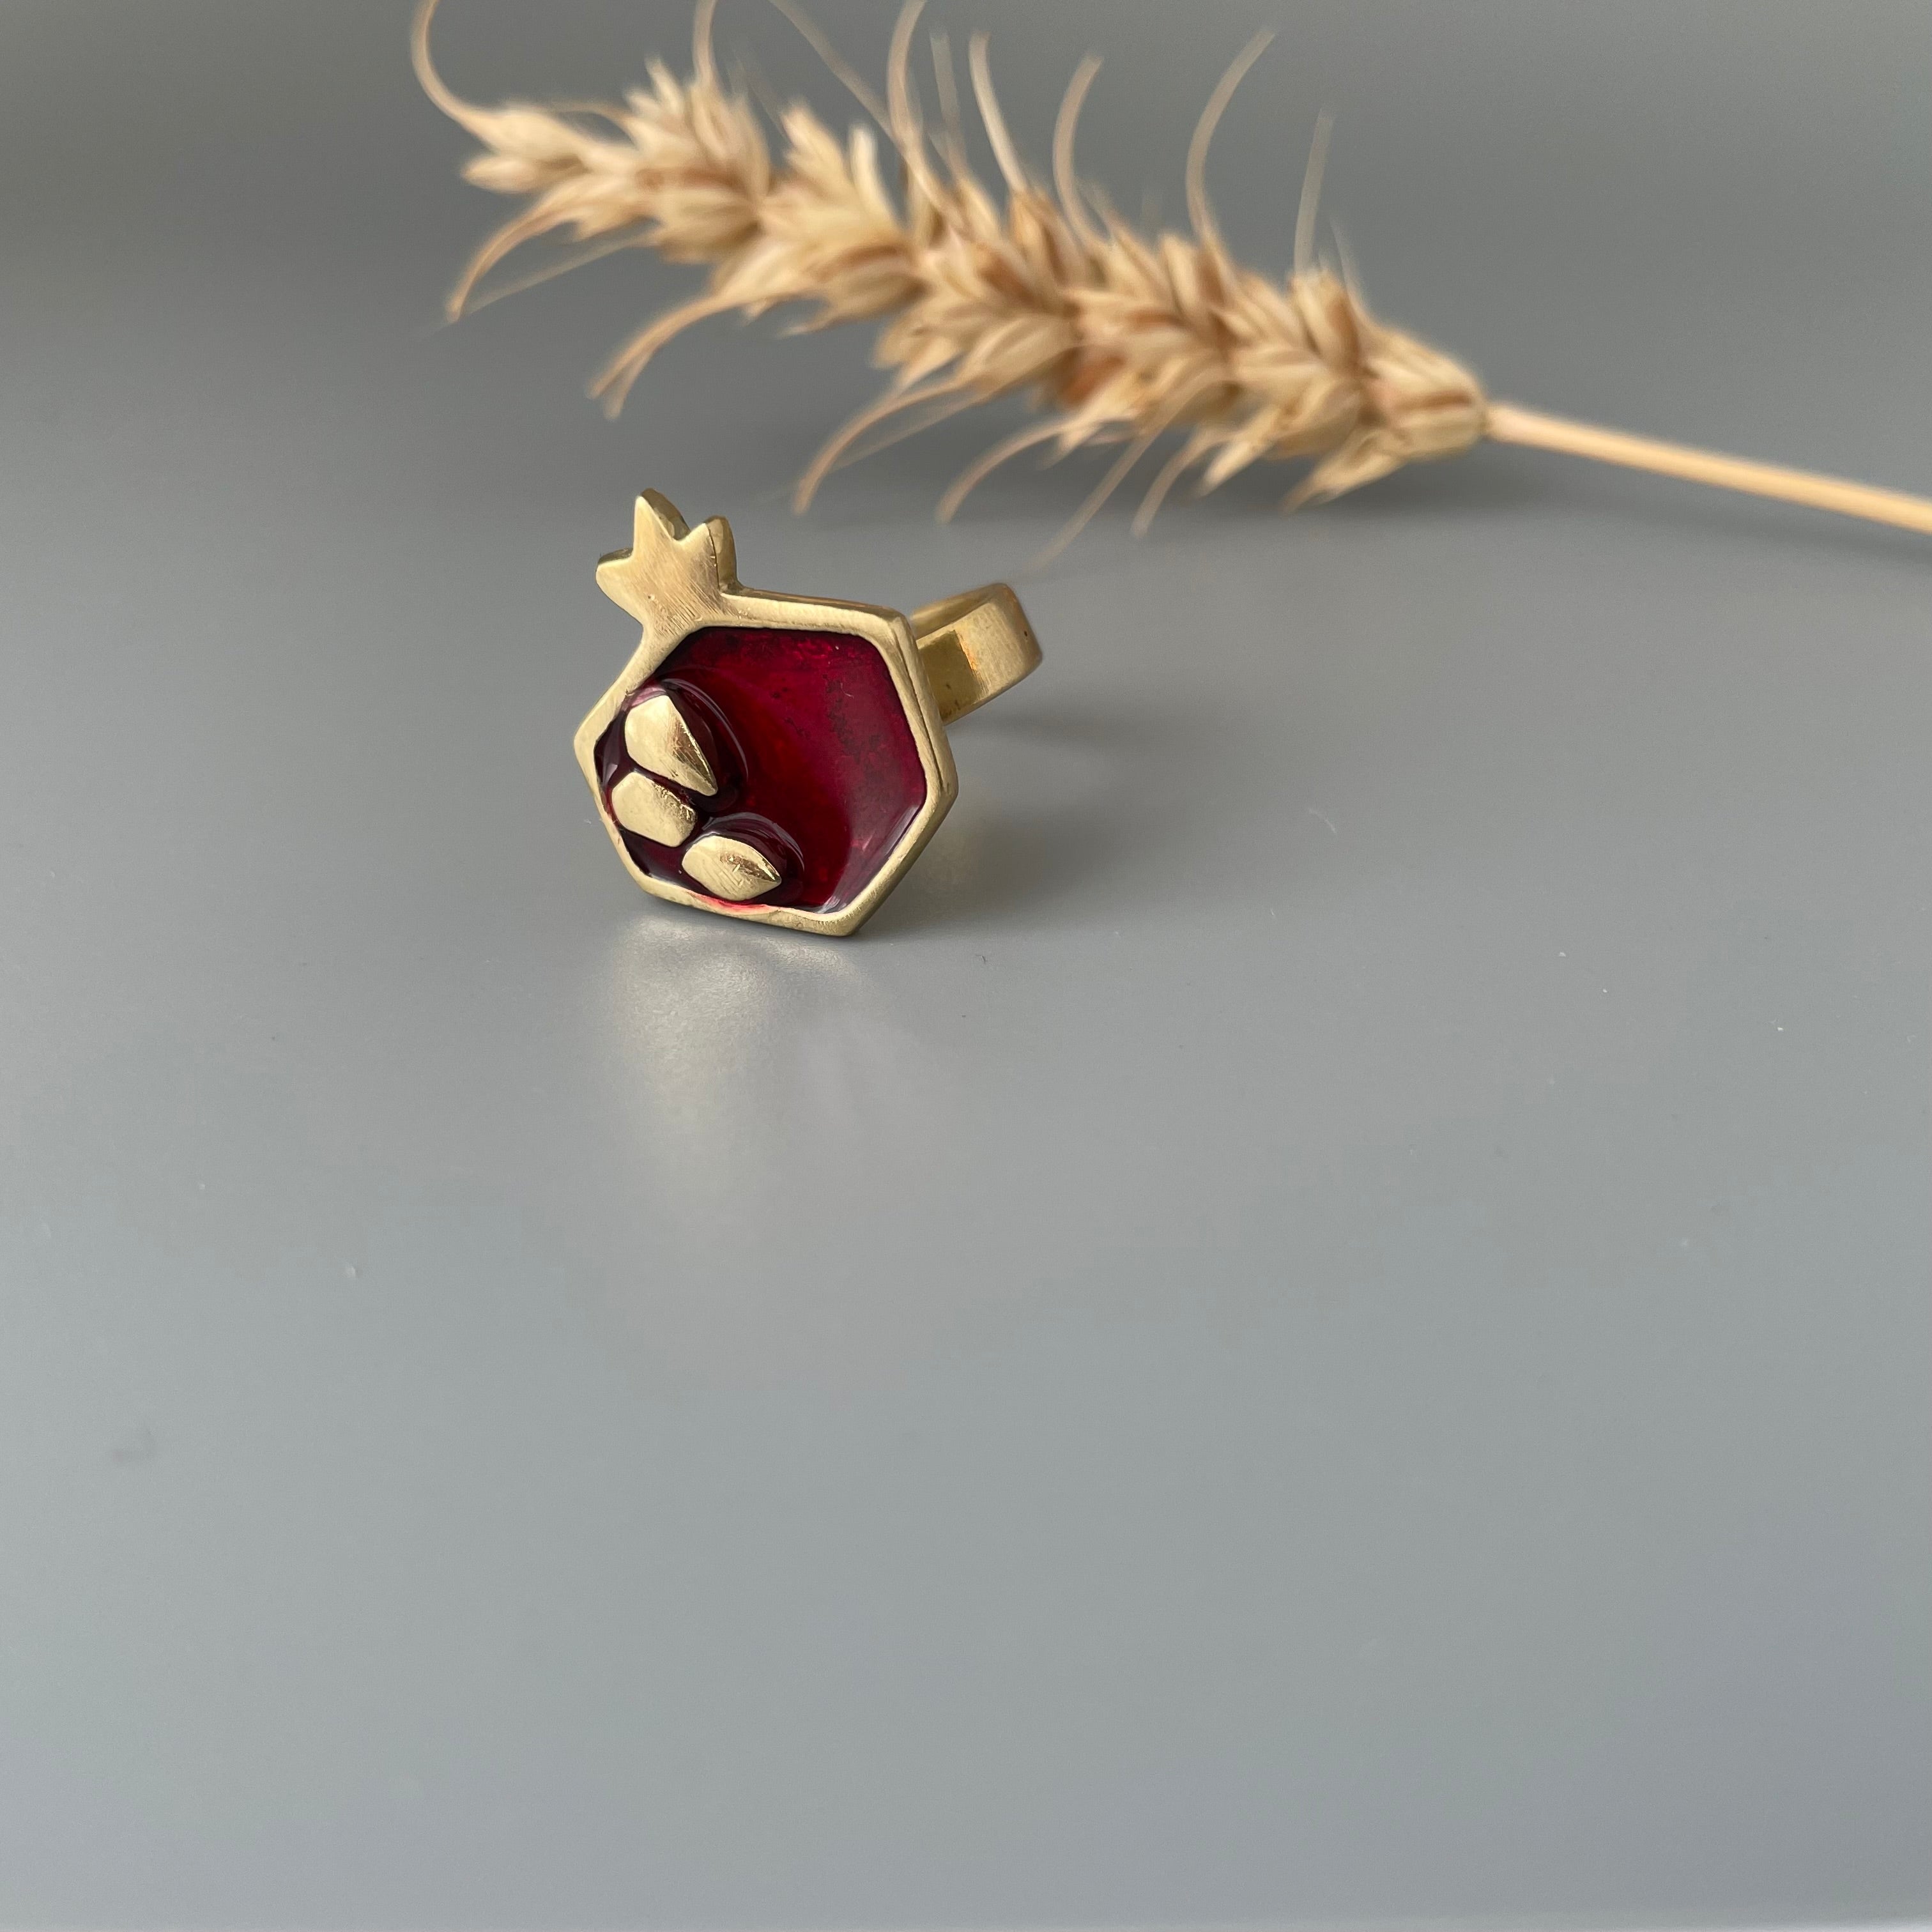 Persian Rings-Pomegranate Shaped Brass Ring with Red Enamel: Persian Jewelry-AFRA ART GALLERY